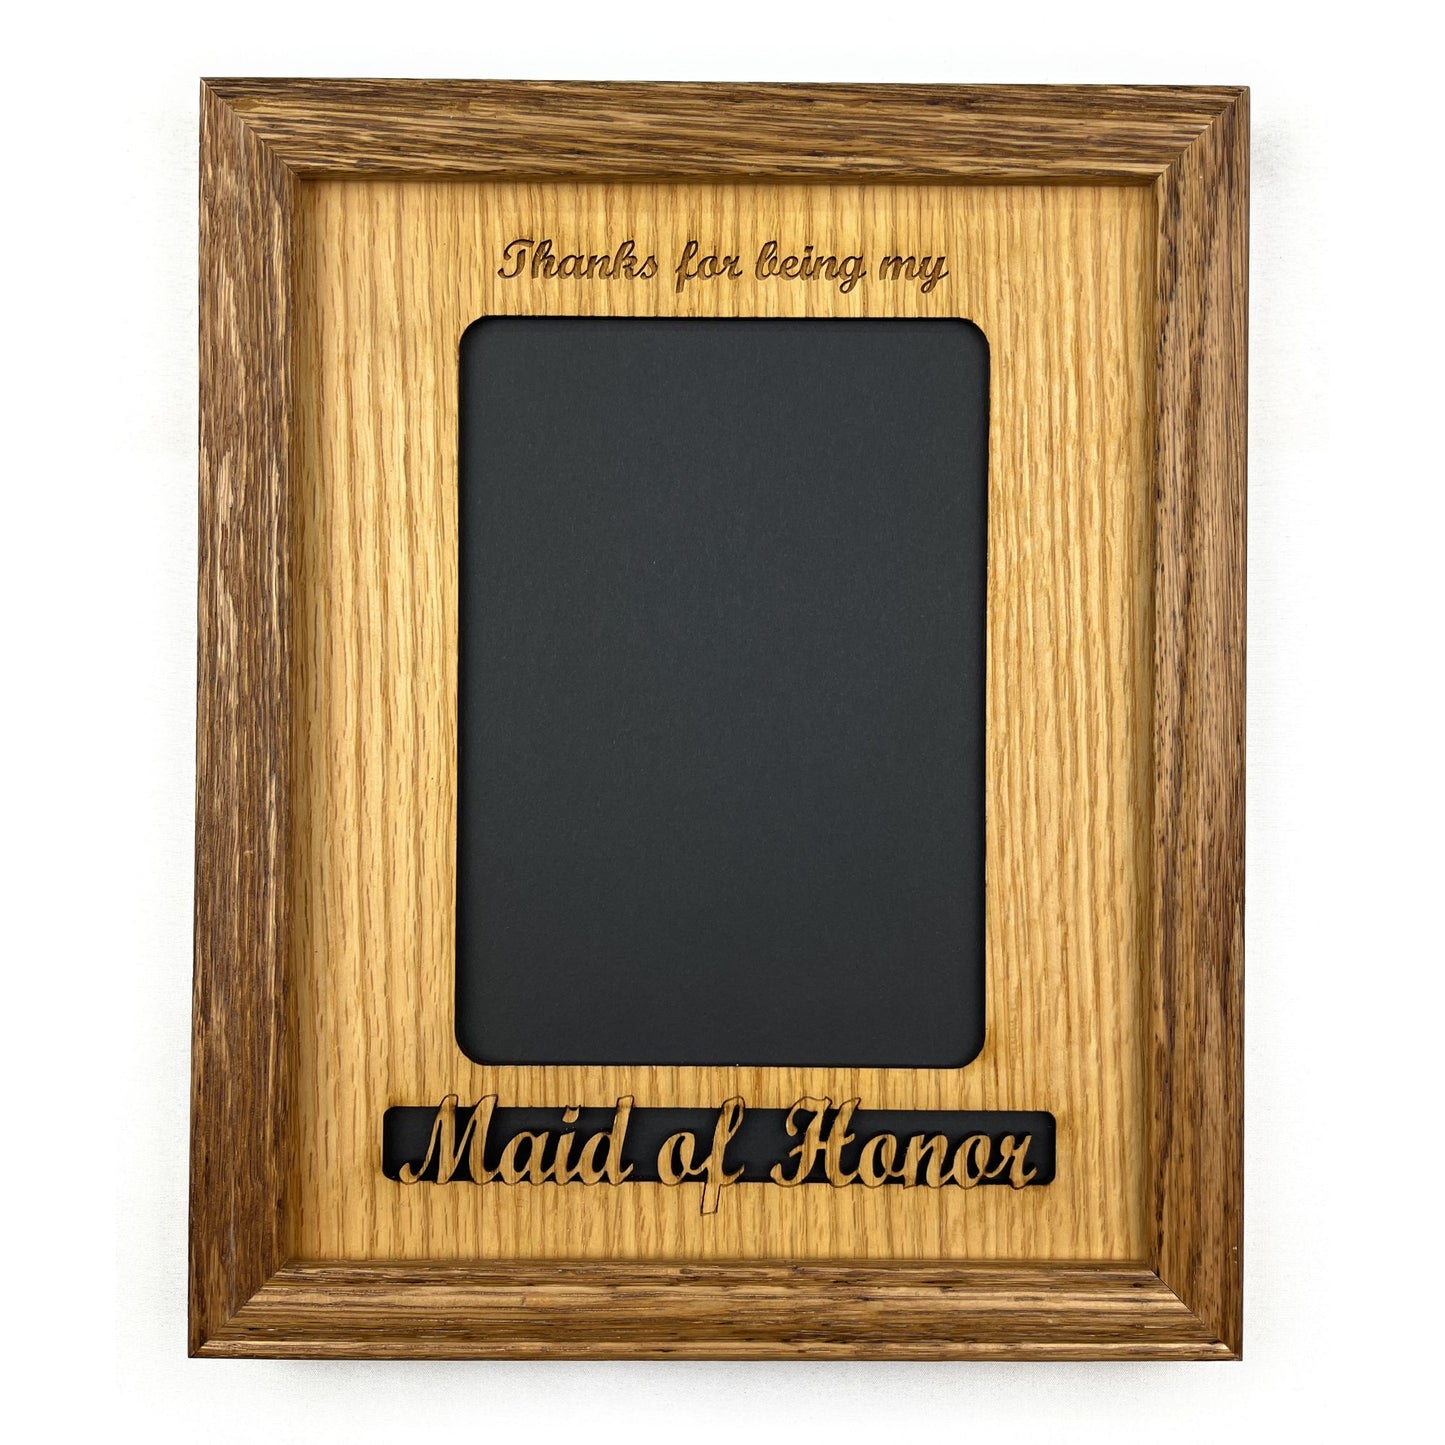 Maid of Honor or Bridesmaid Picture Frame